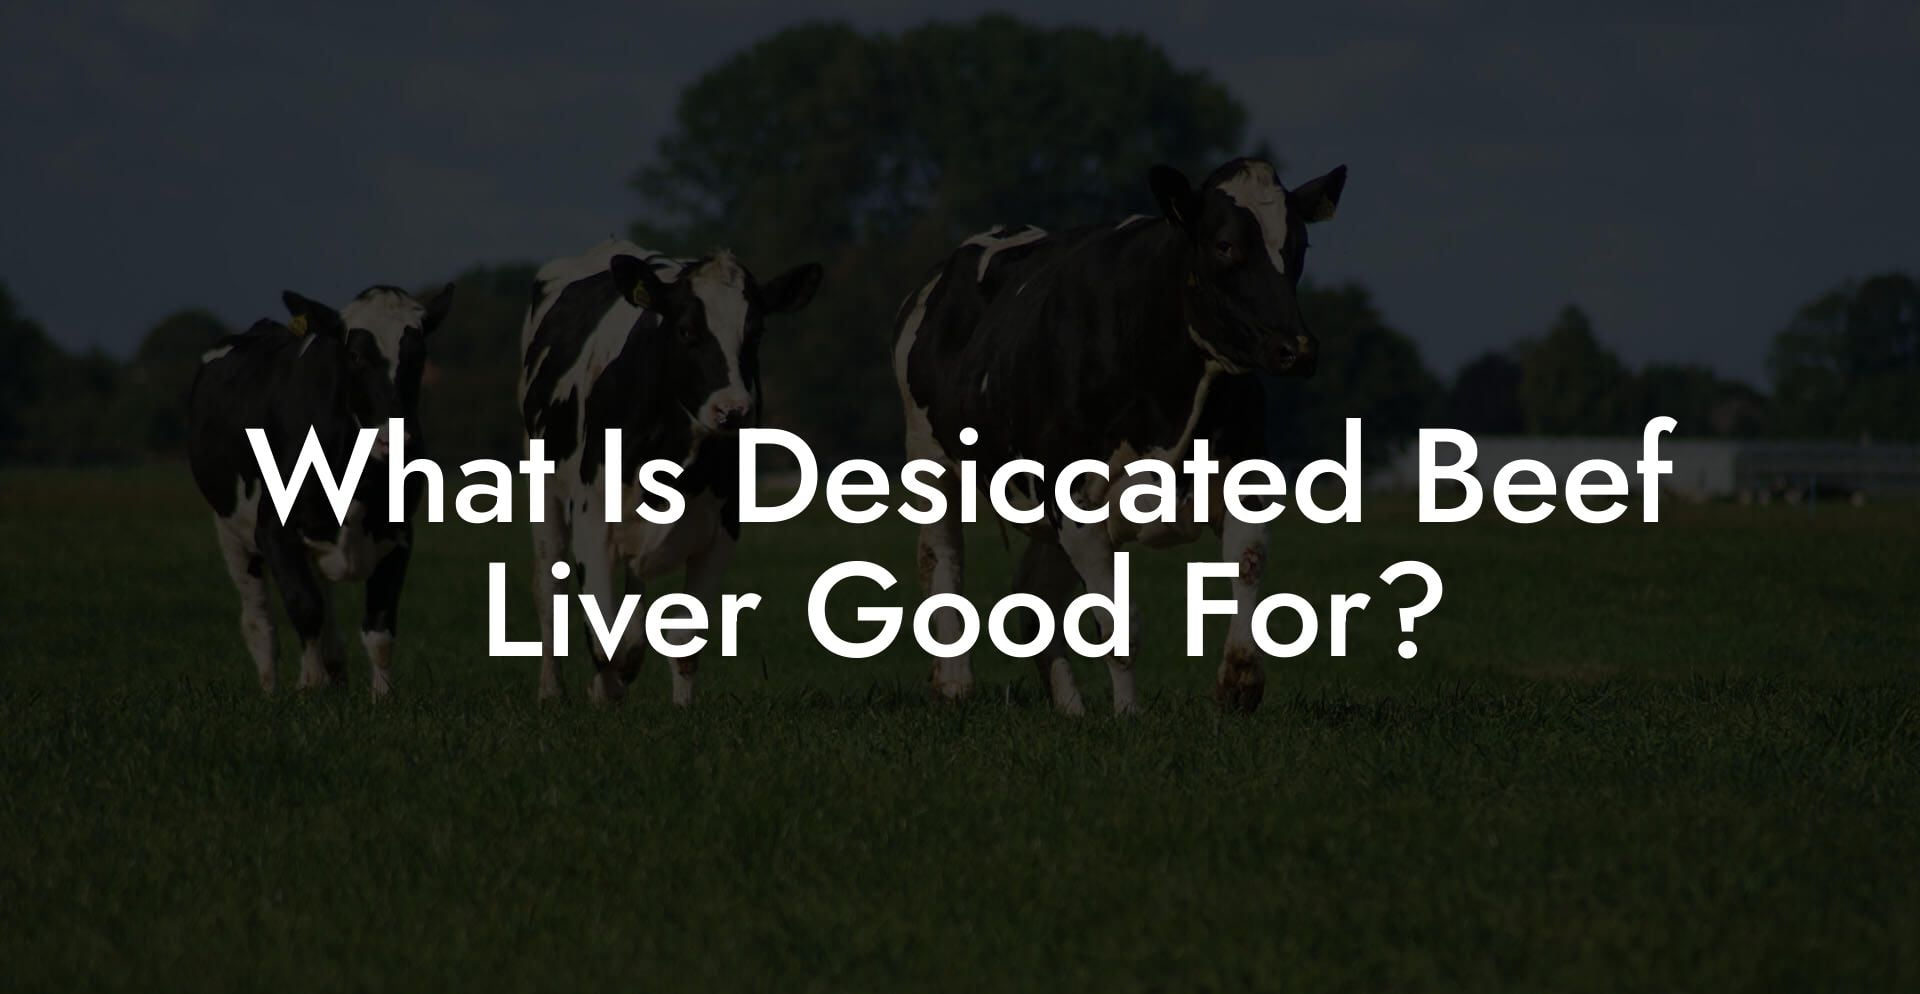 What Is Desiccated Beef Liver Good For?